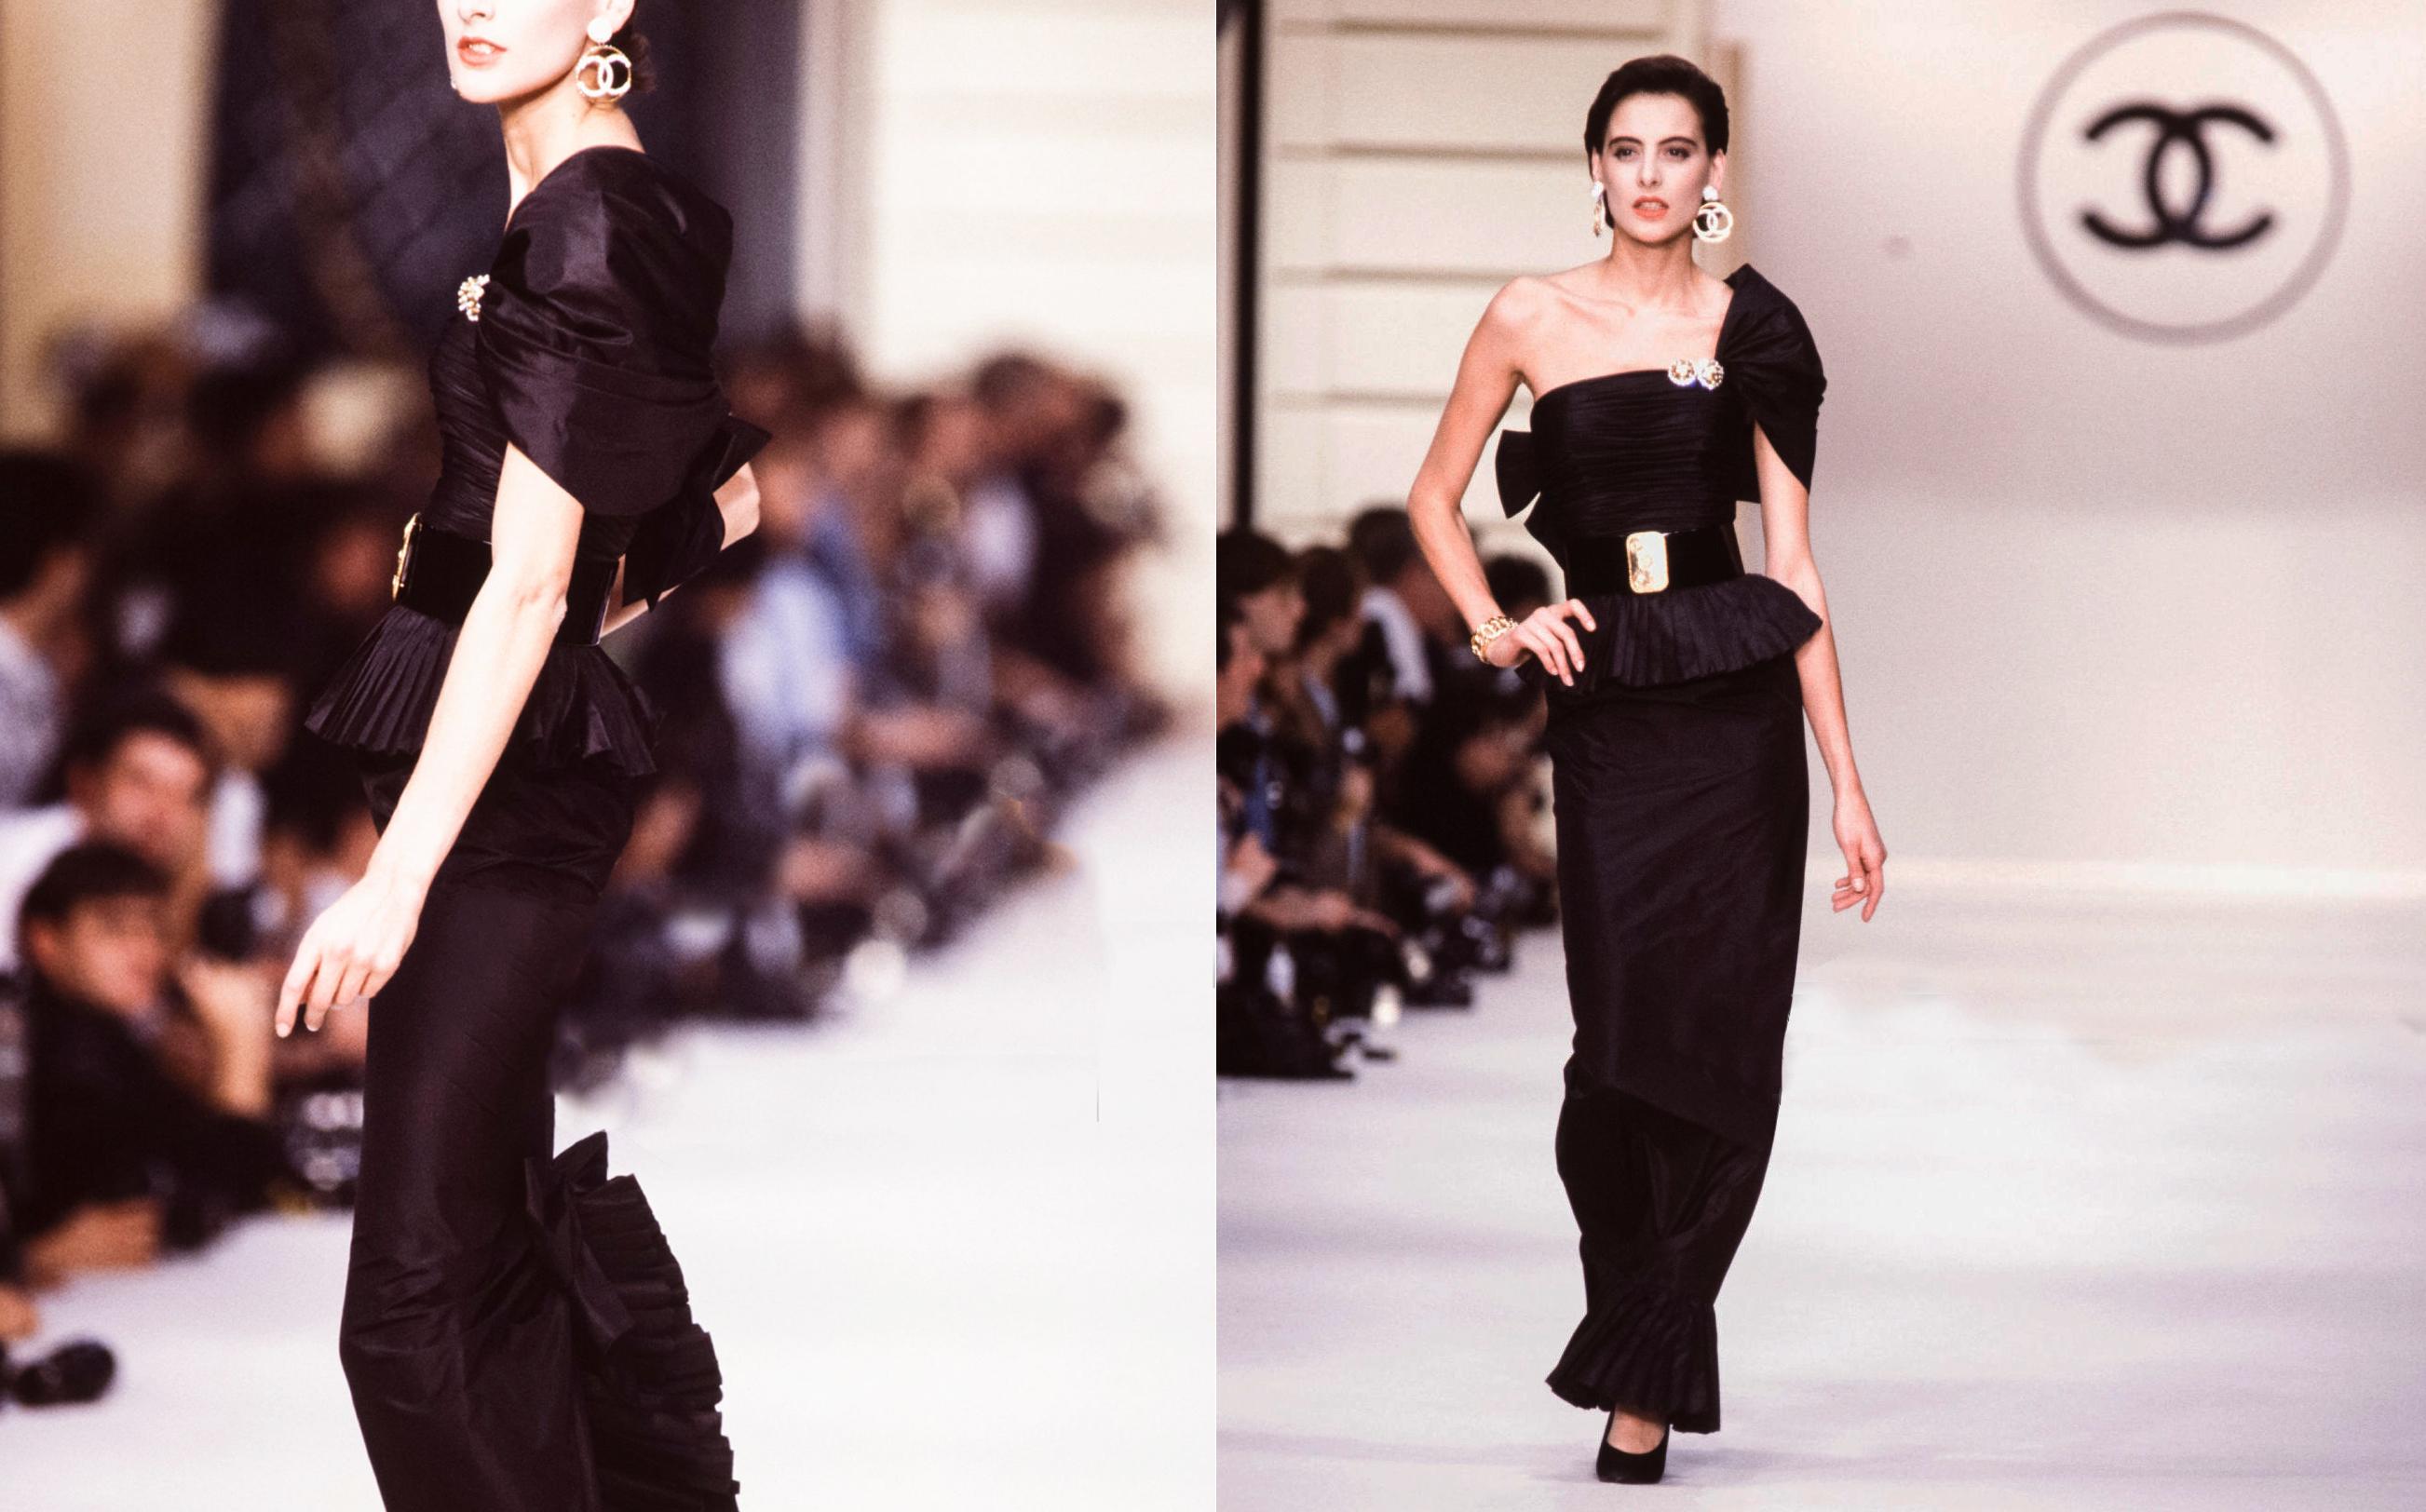 karl lagerfeld gowns